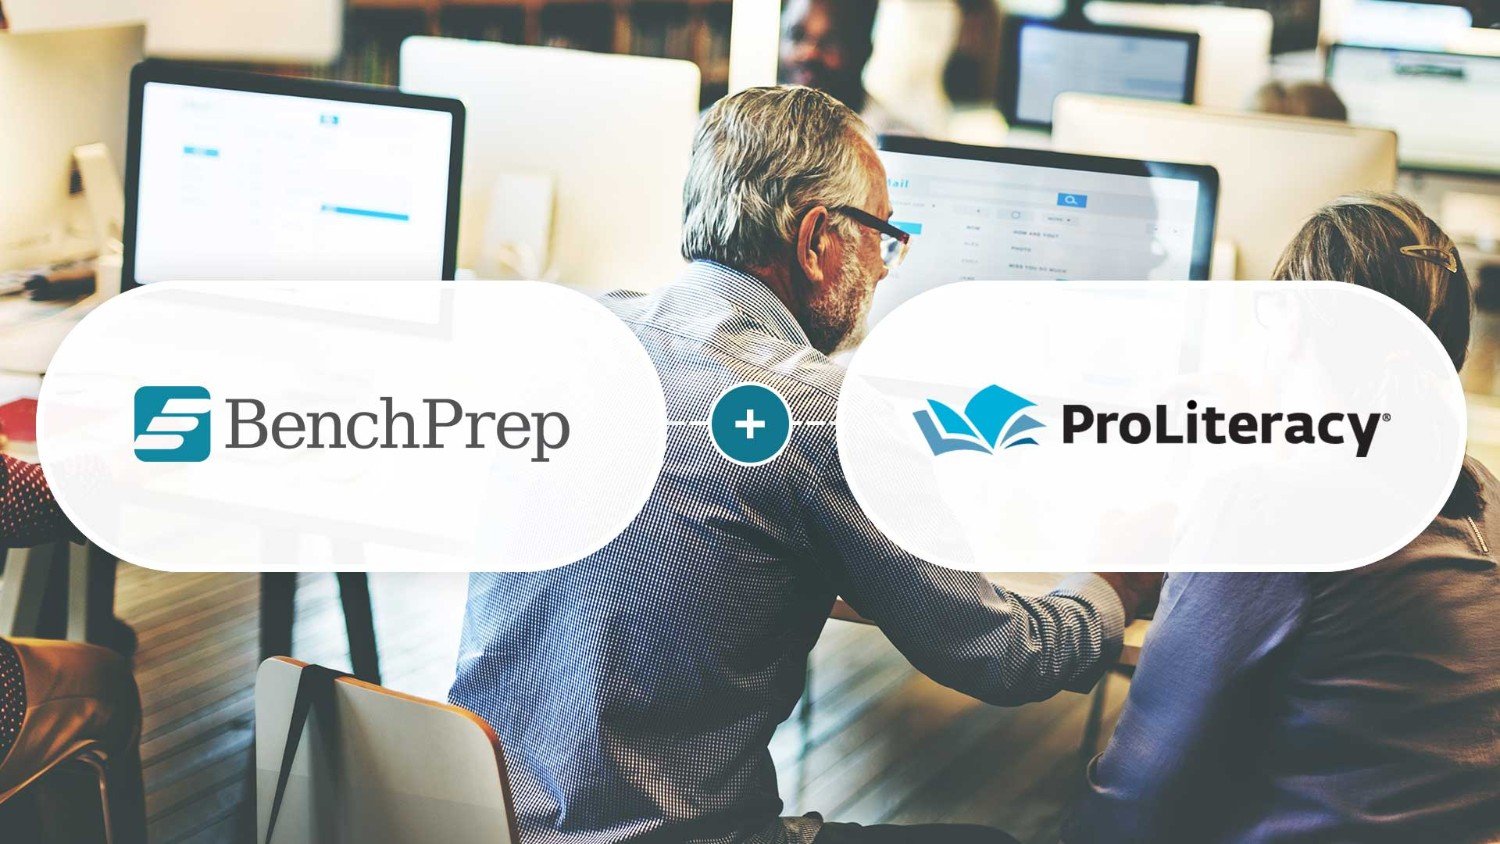 BenchPrep and ProLiteracy partner to help close the adult literacy gap